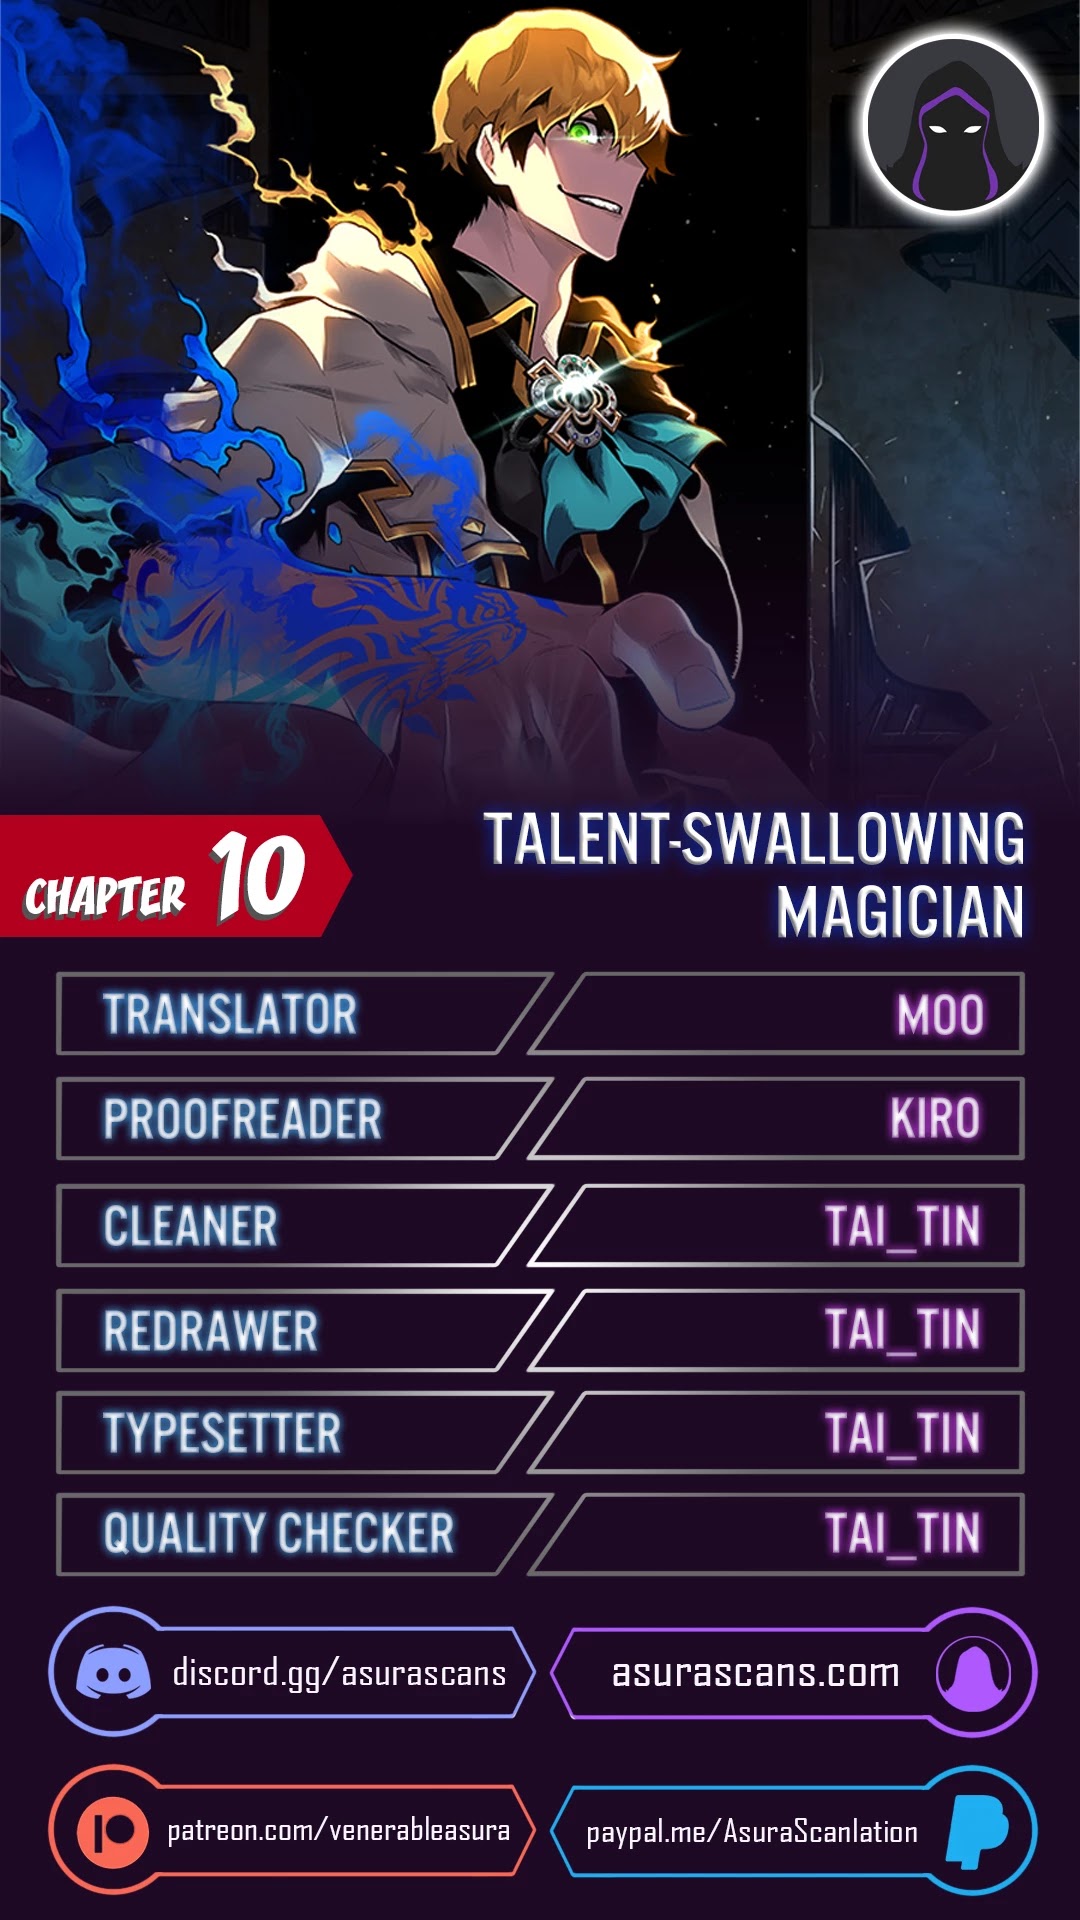 Talent-Swallowing Magician - Page 1